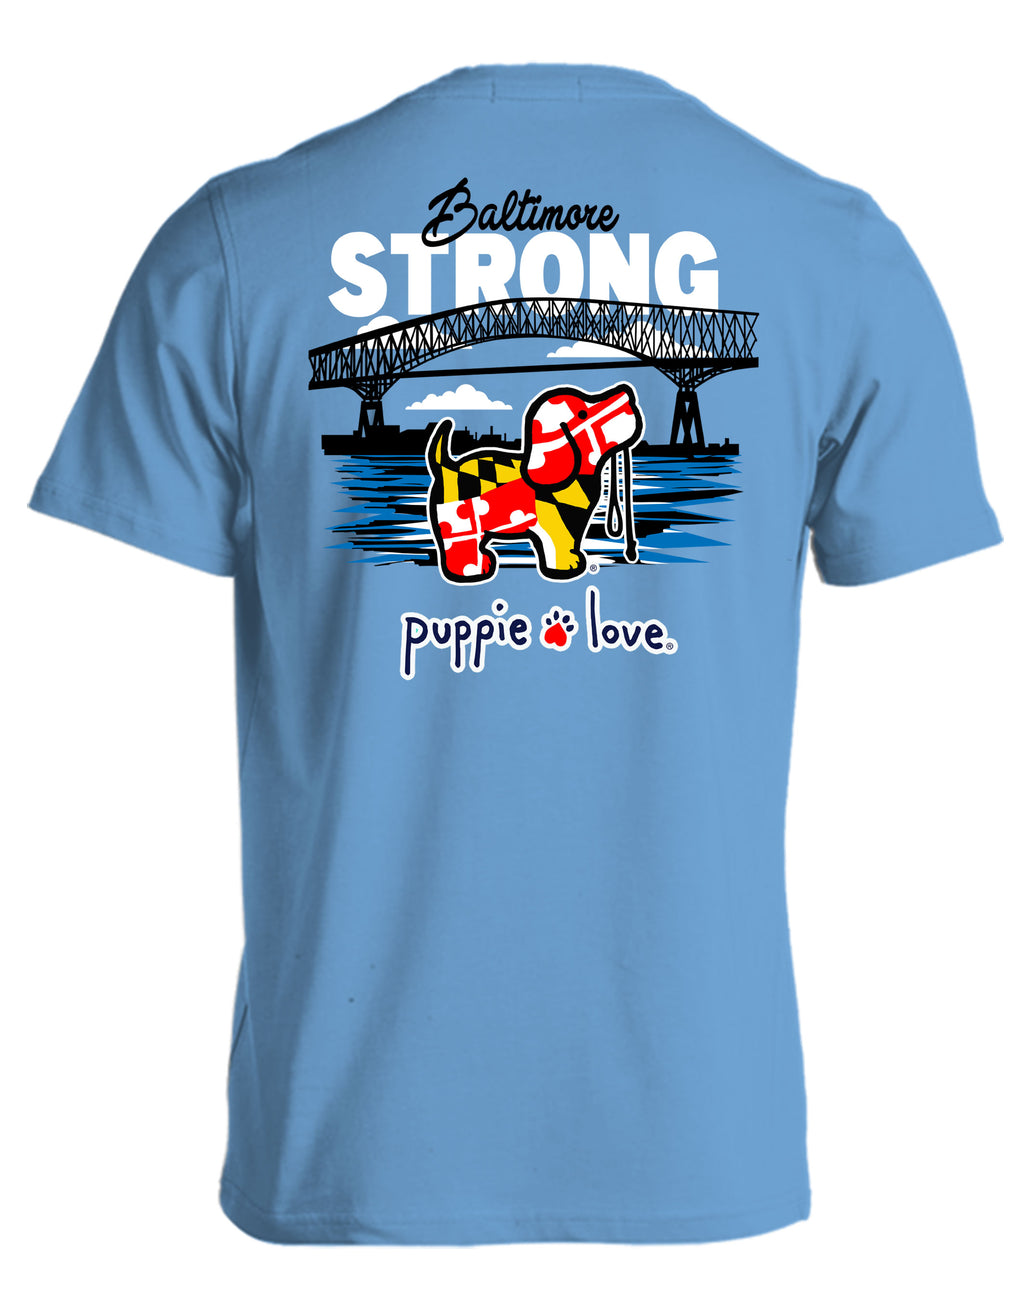 BALTIMORE STRONG PUP (PRE-ORDER, SHIPS IN 2 WEEKS) - Puppie Love